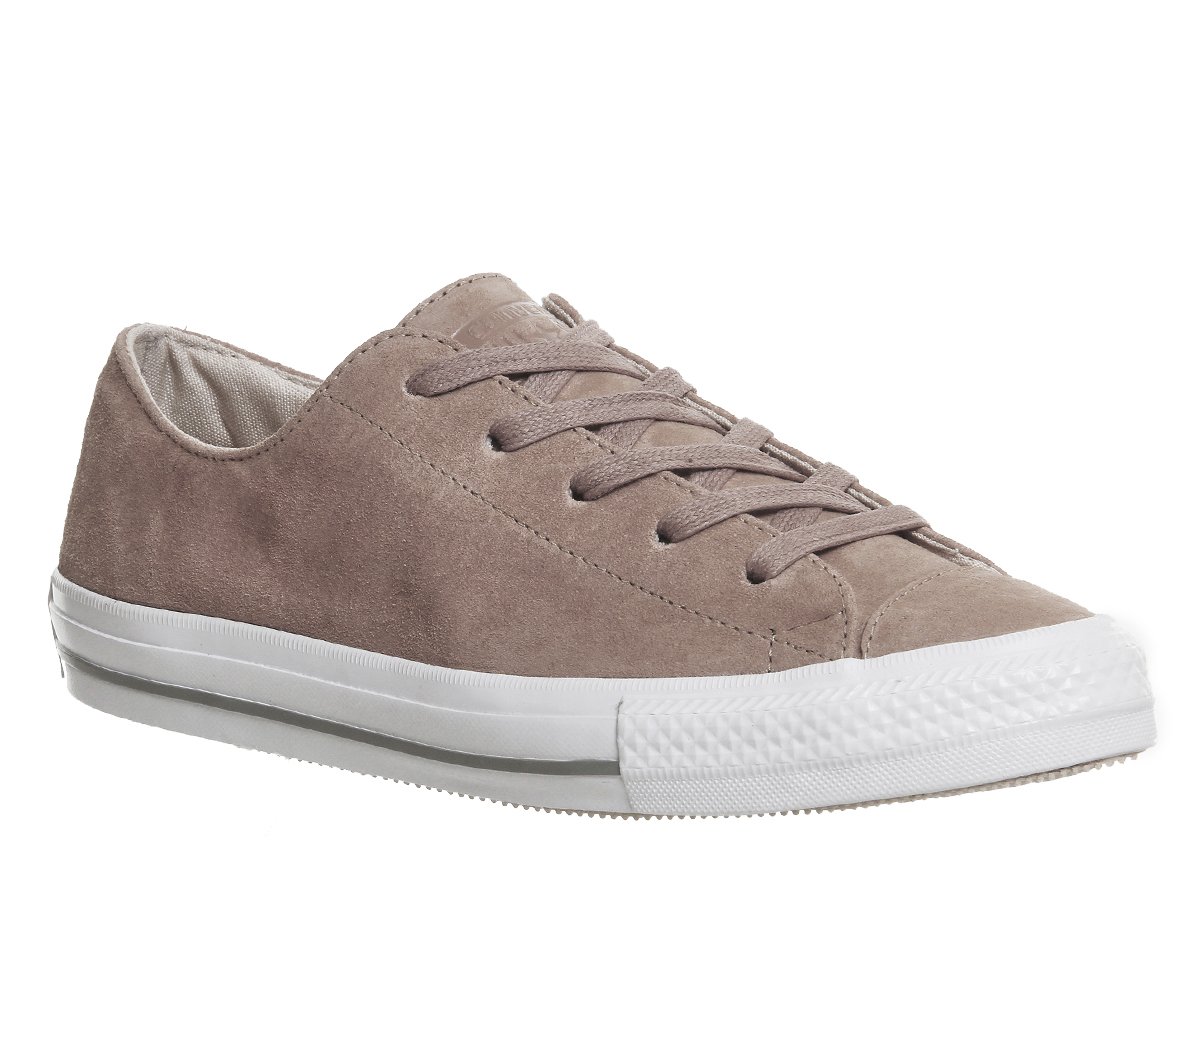 Converse Ctas Gemma Low Camel Ivory Suede - Hers trainers